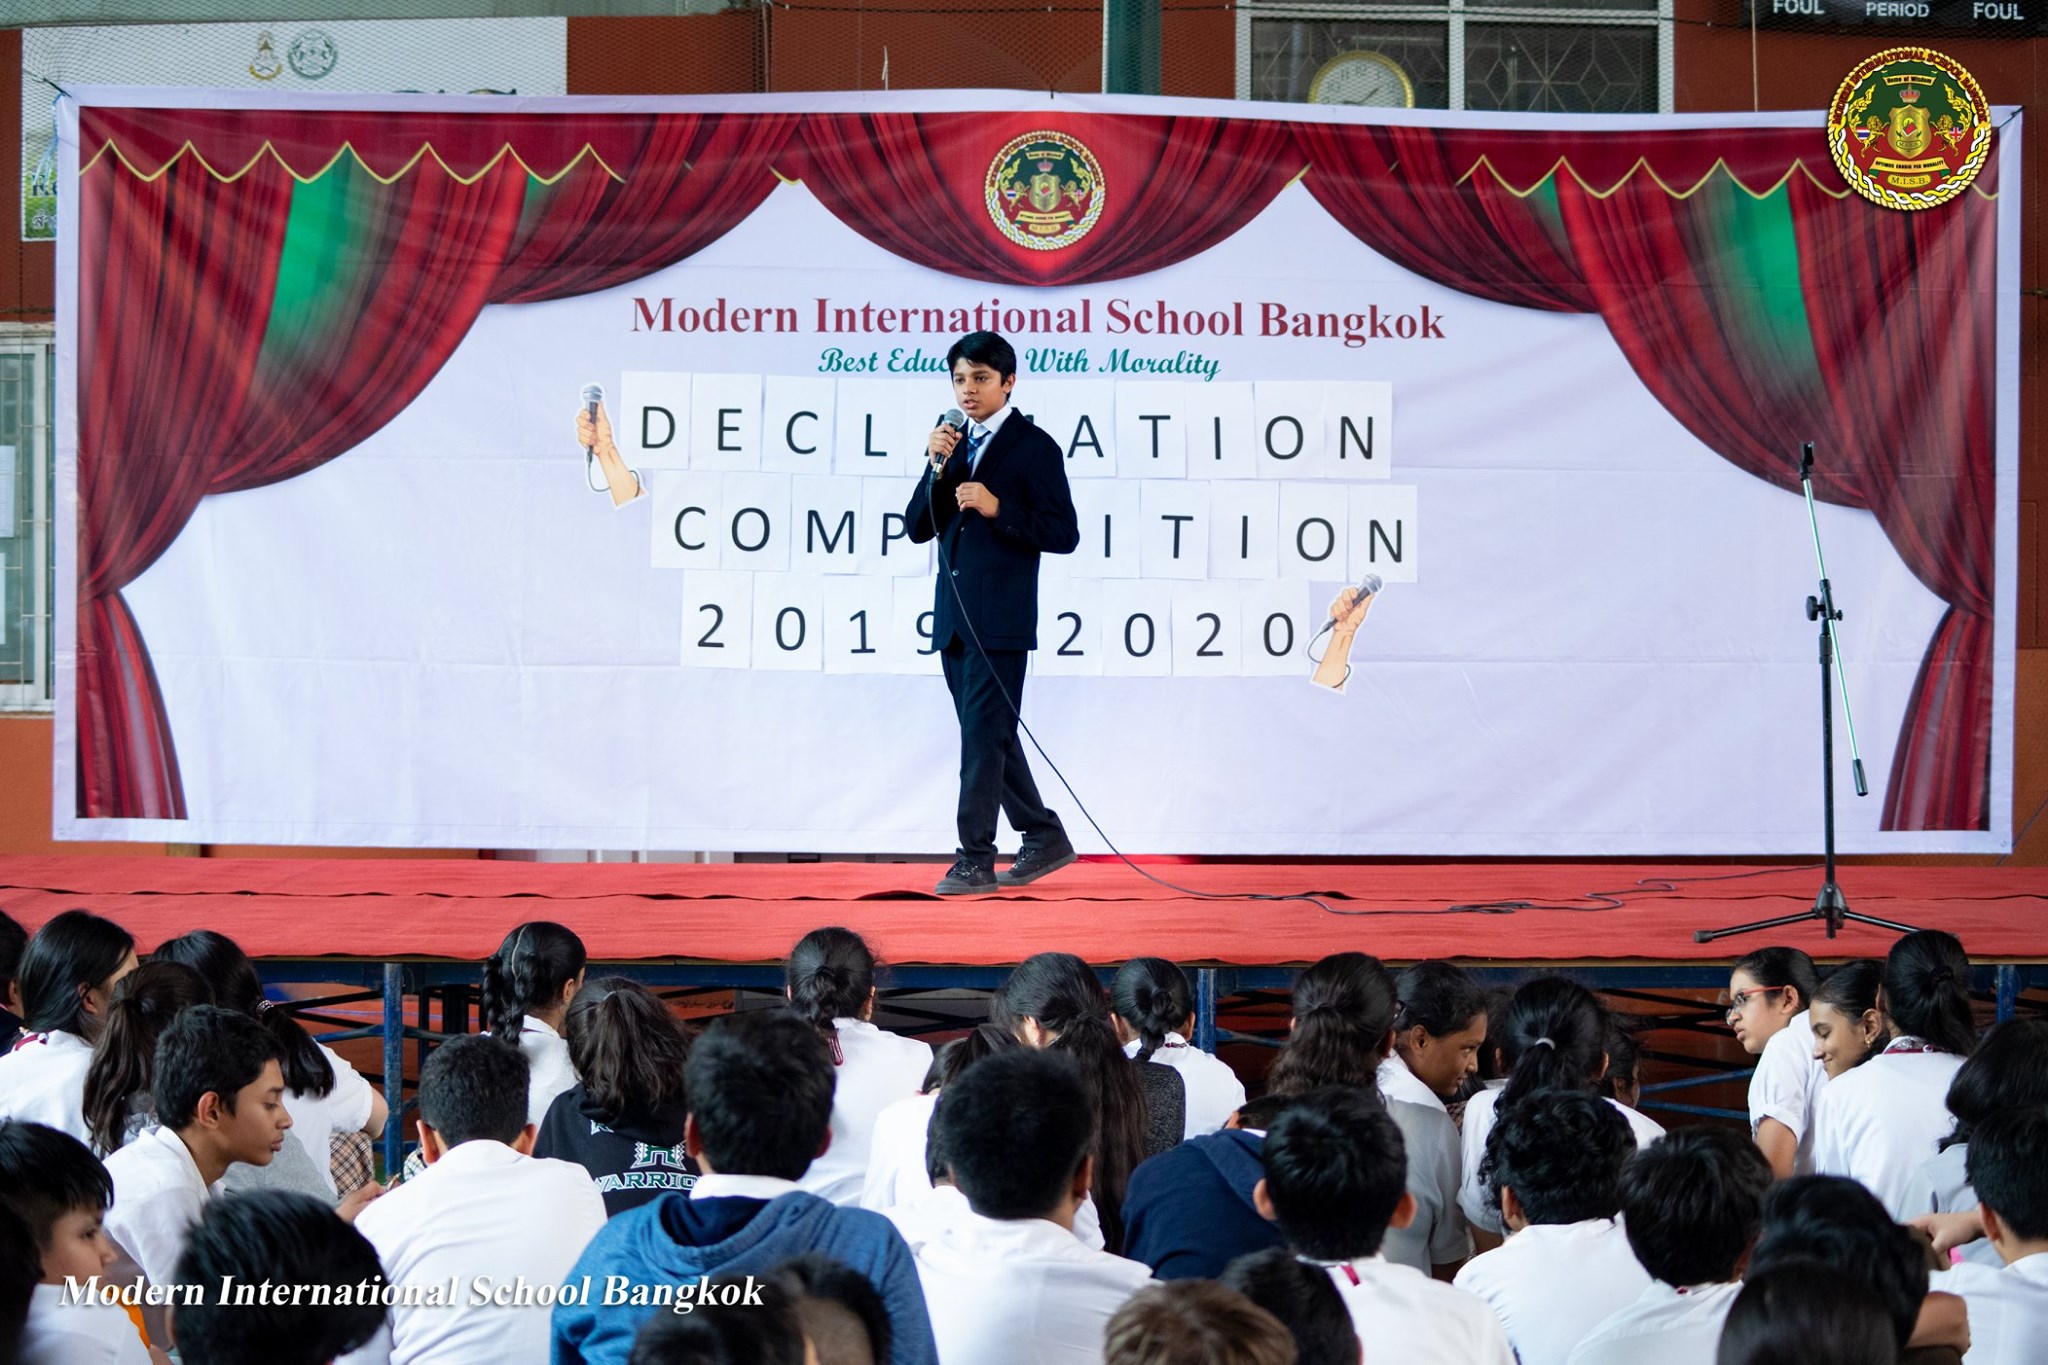 Intramural Secondary Declamation Competitions